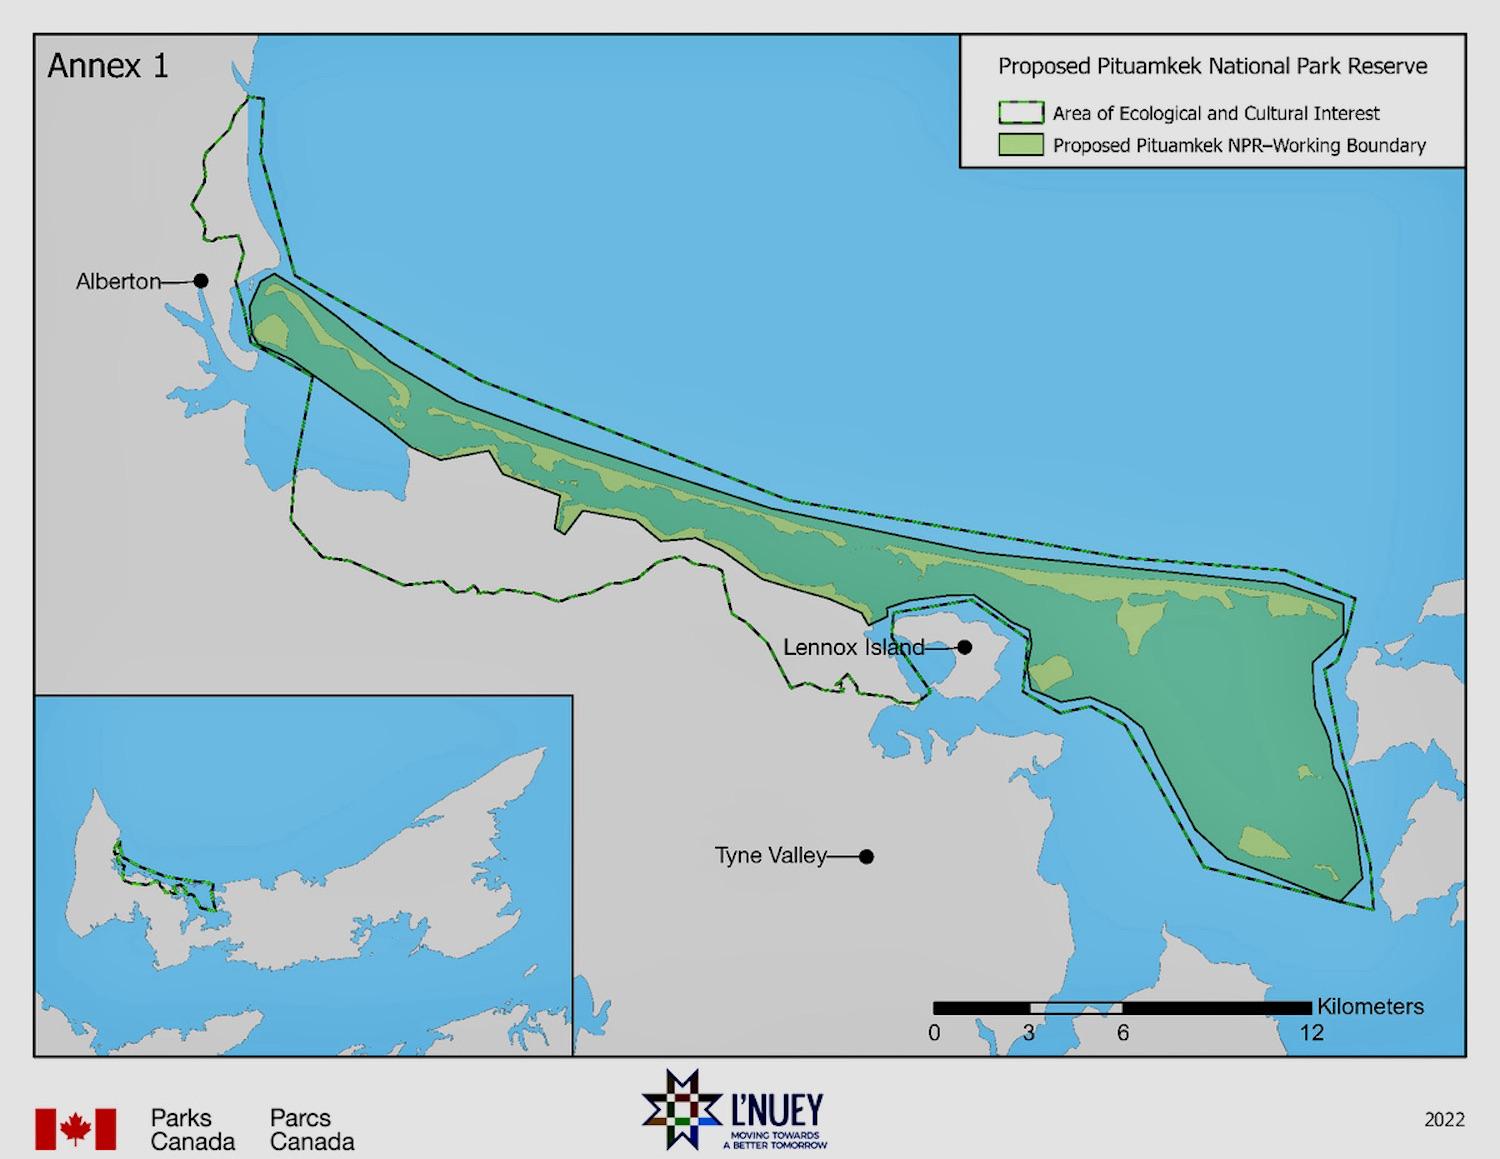 The exact boundaries of the proposed Pituamkek National Park Reserve are being negotiated.